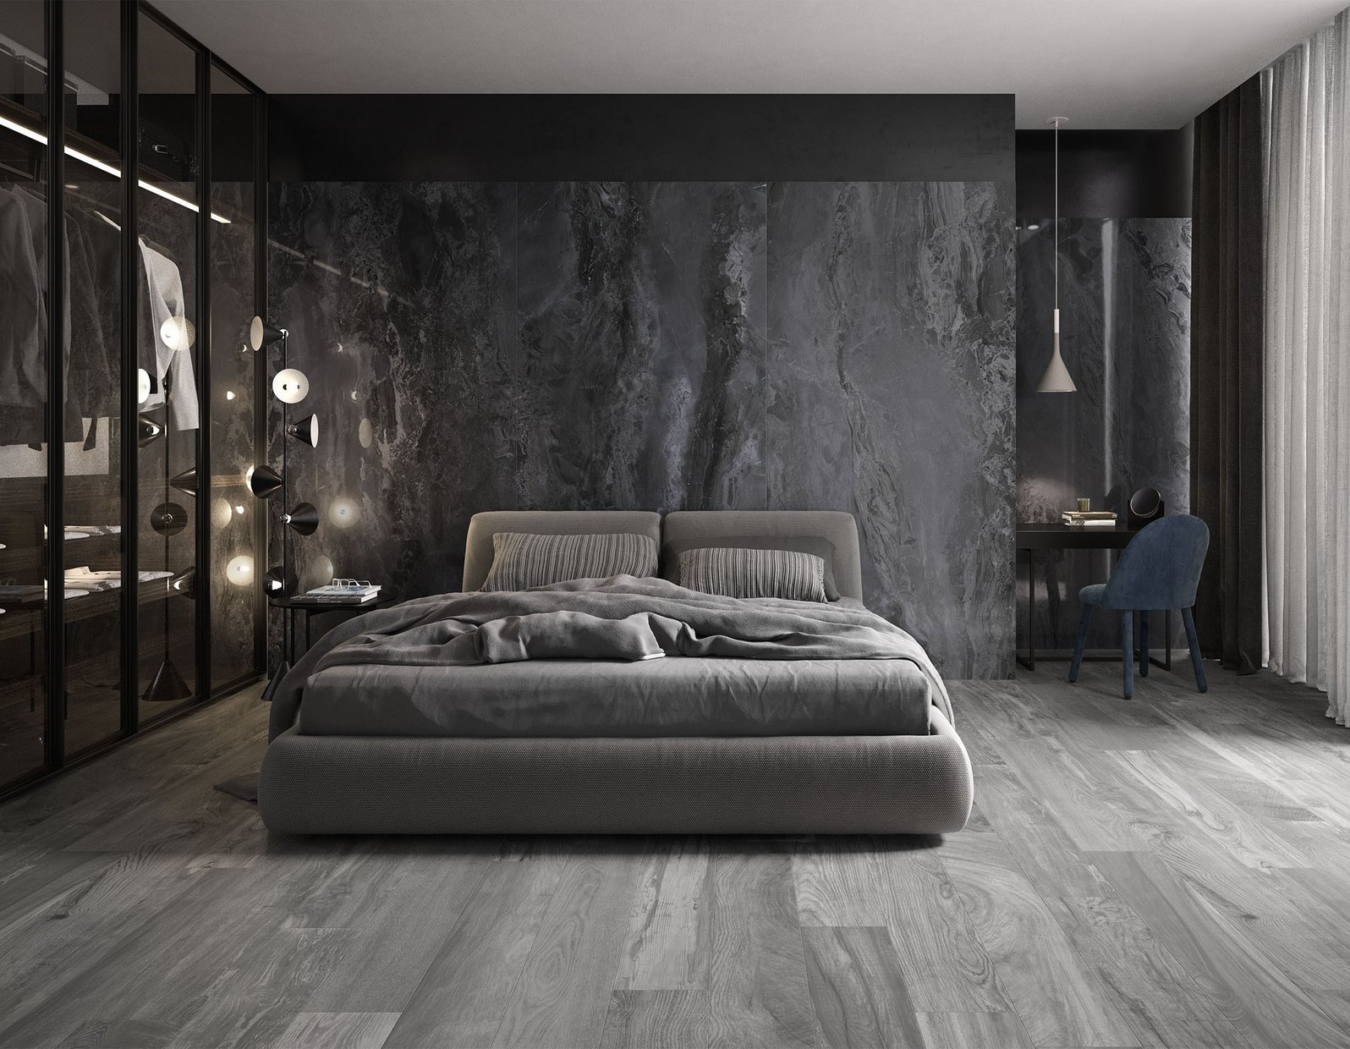 Designer Tiles To Create Ultimate Luxury In Your Home